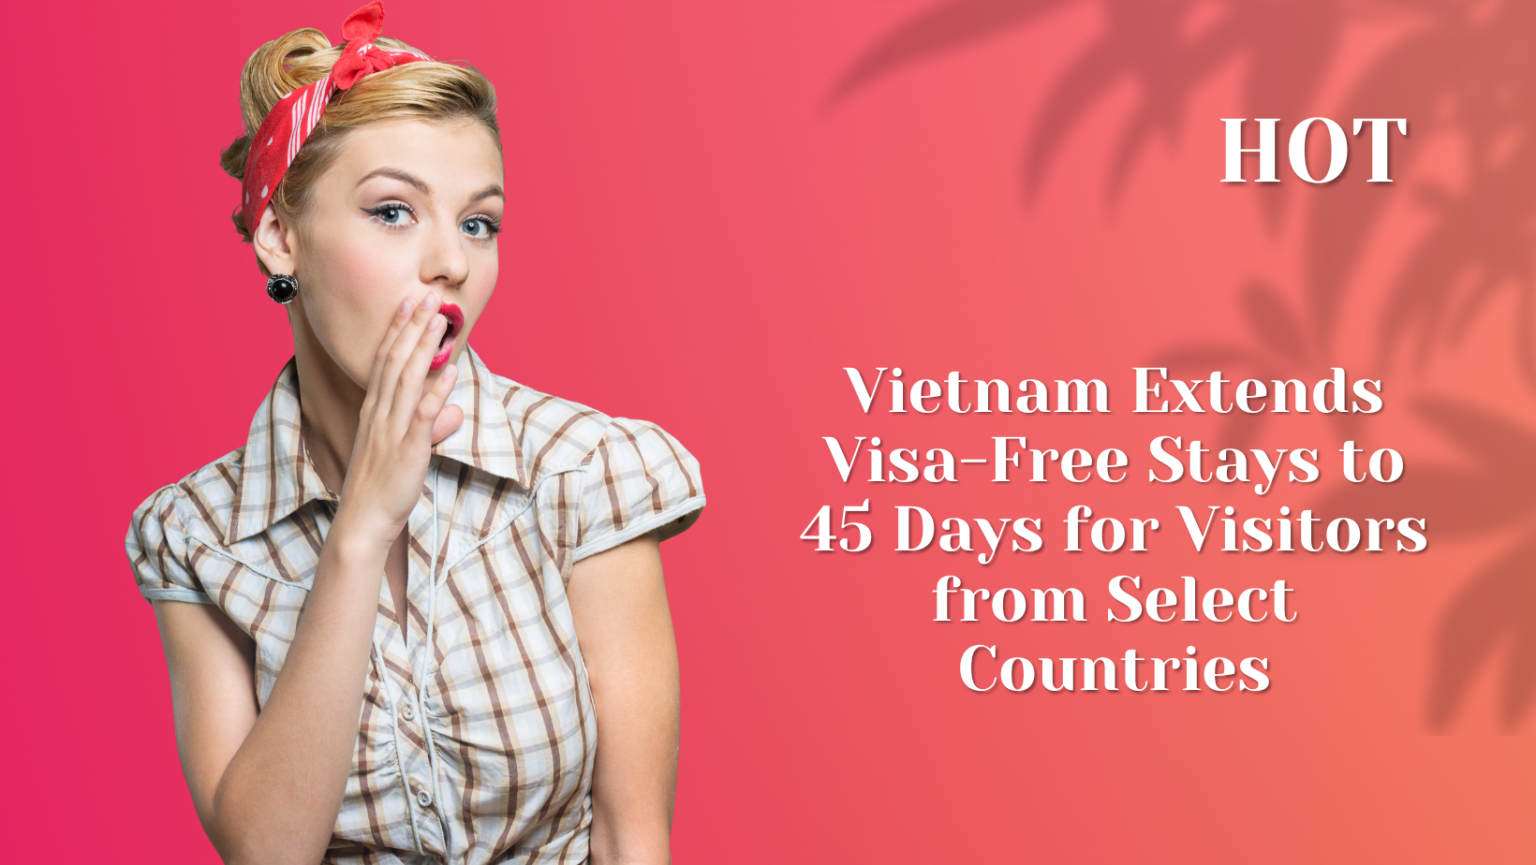 🔥 🔥 🔥 🔥 Hot Vietnam Extends Visa Free Stays To 45 Days For Visitors From Select Countries 👉 6753